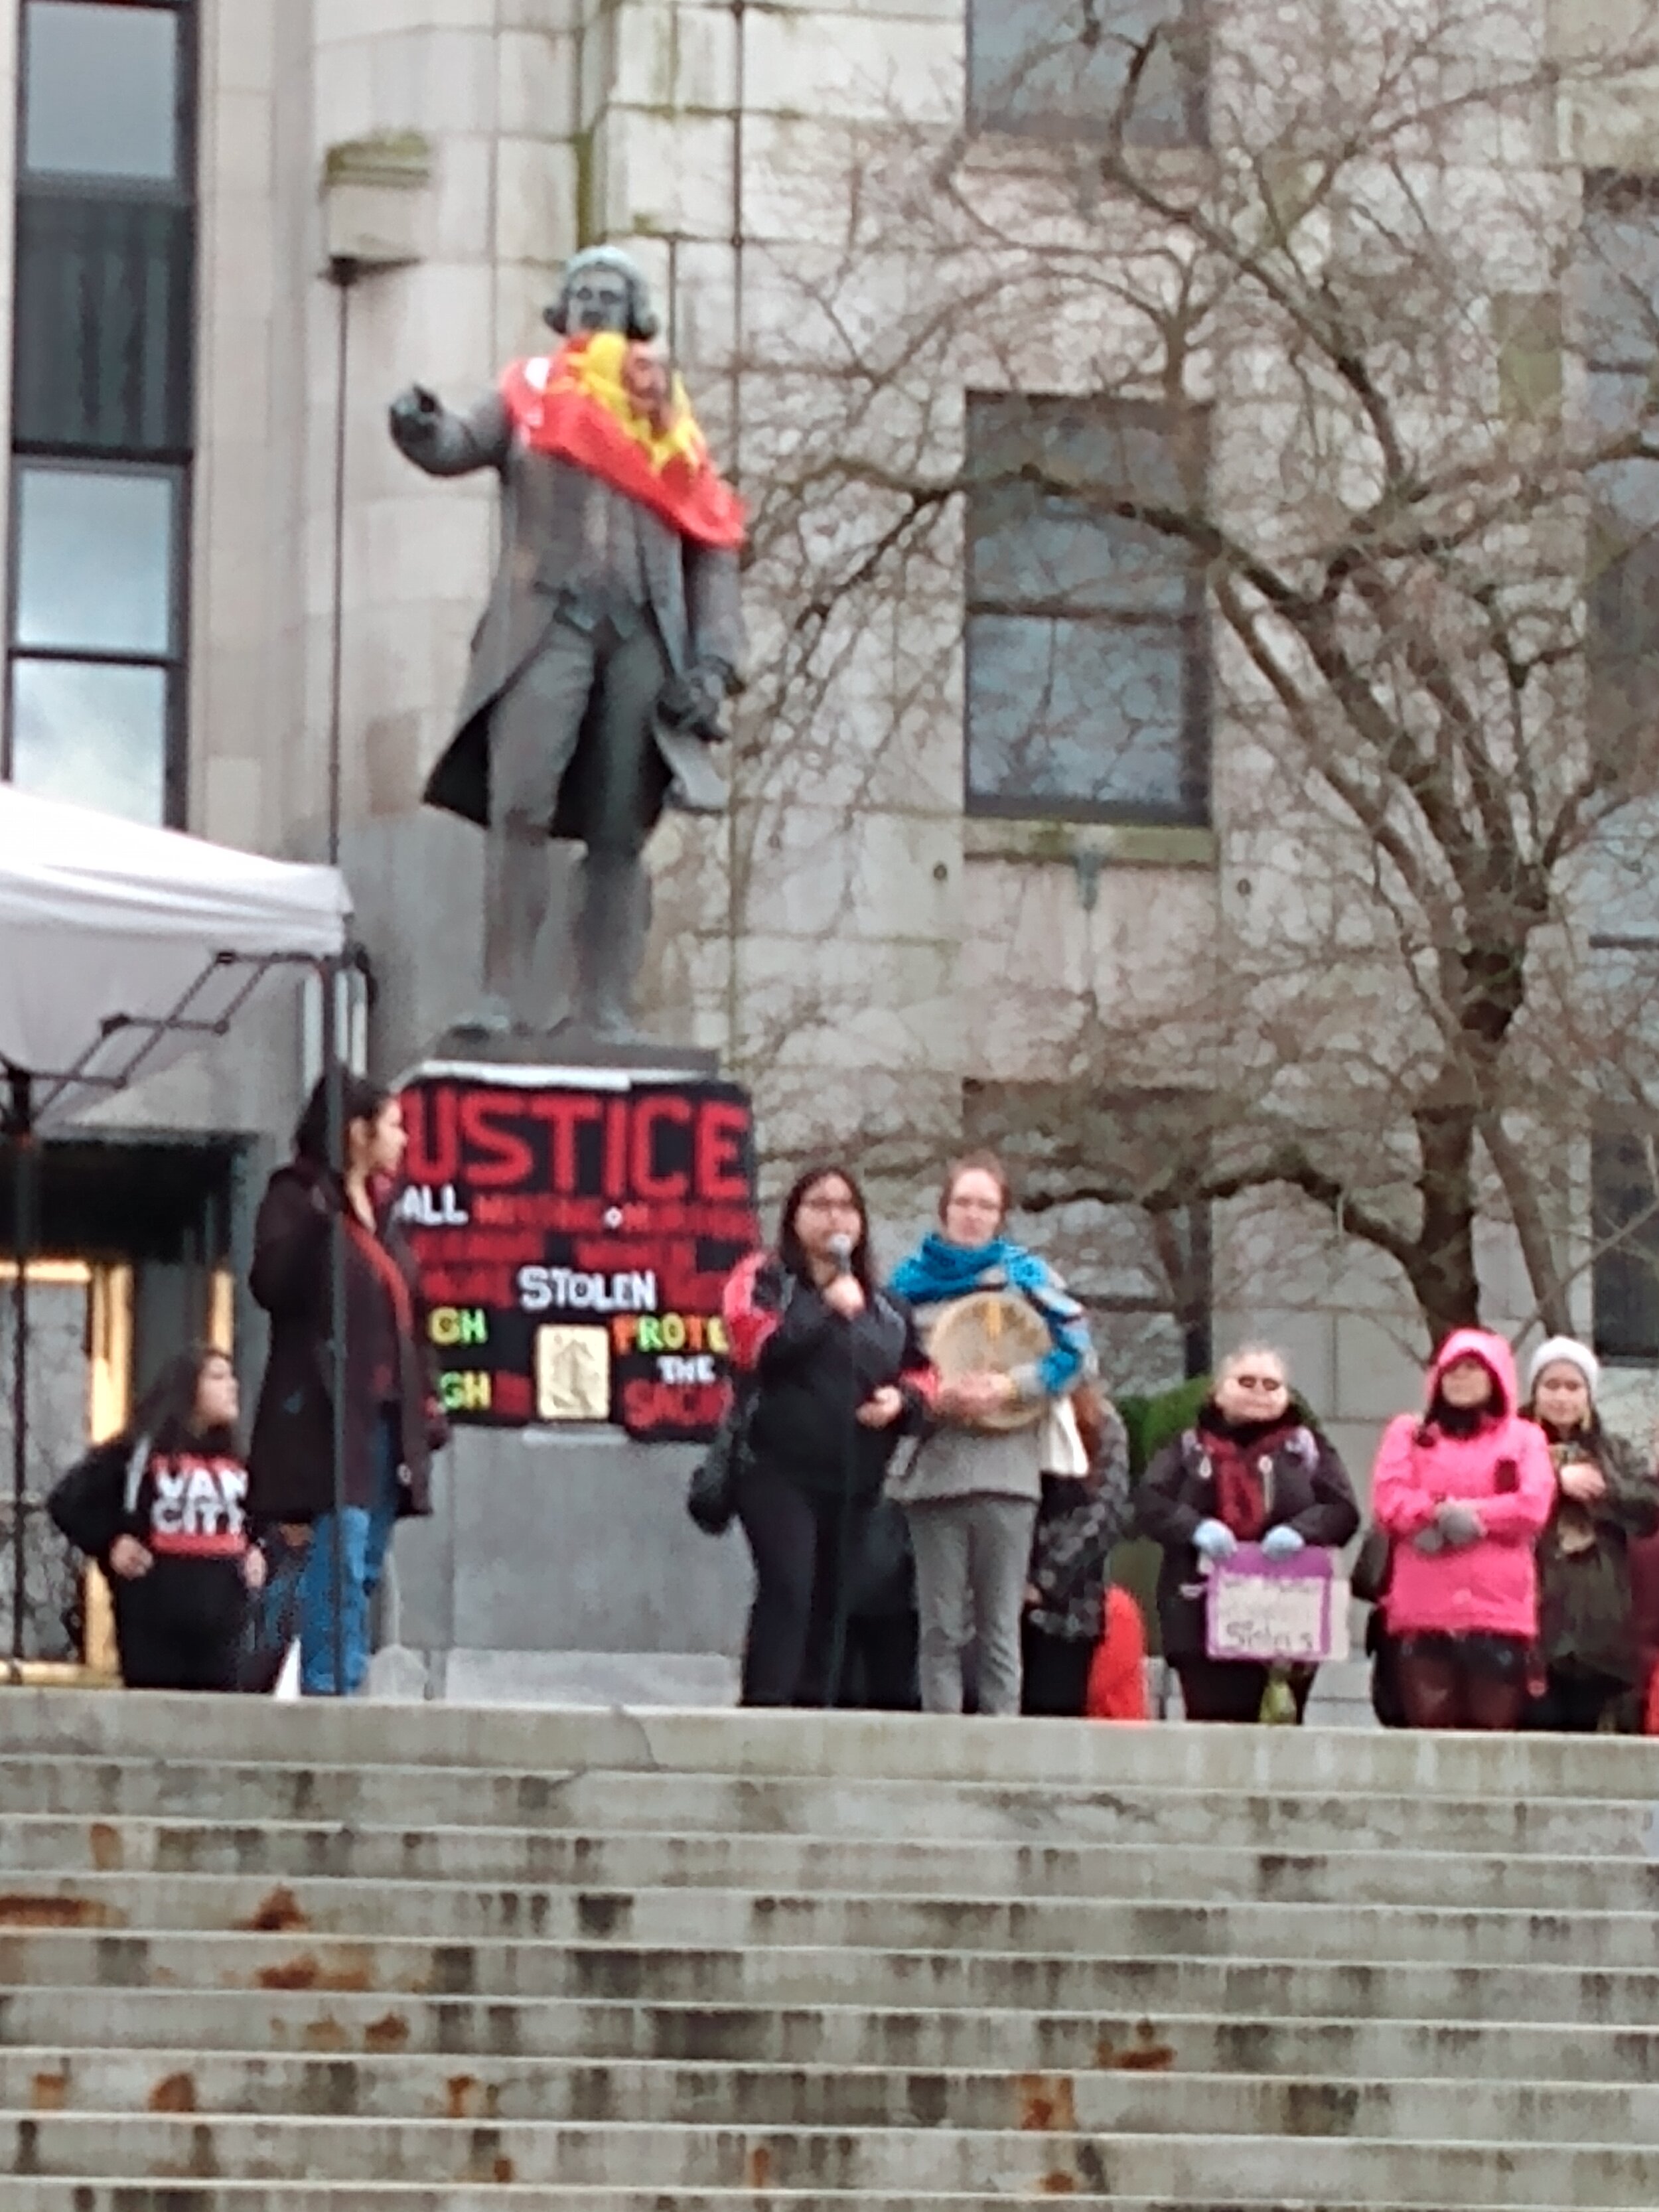 Student walkout, rally, and march in solidarity with Wet'suwet'en - Vancouver, Jan 2020 (1).jpg